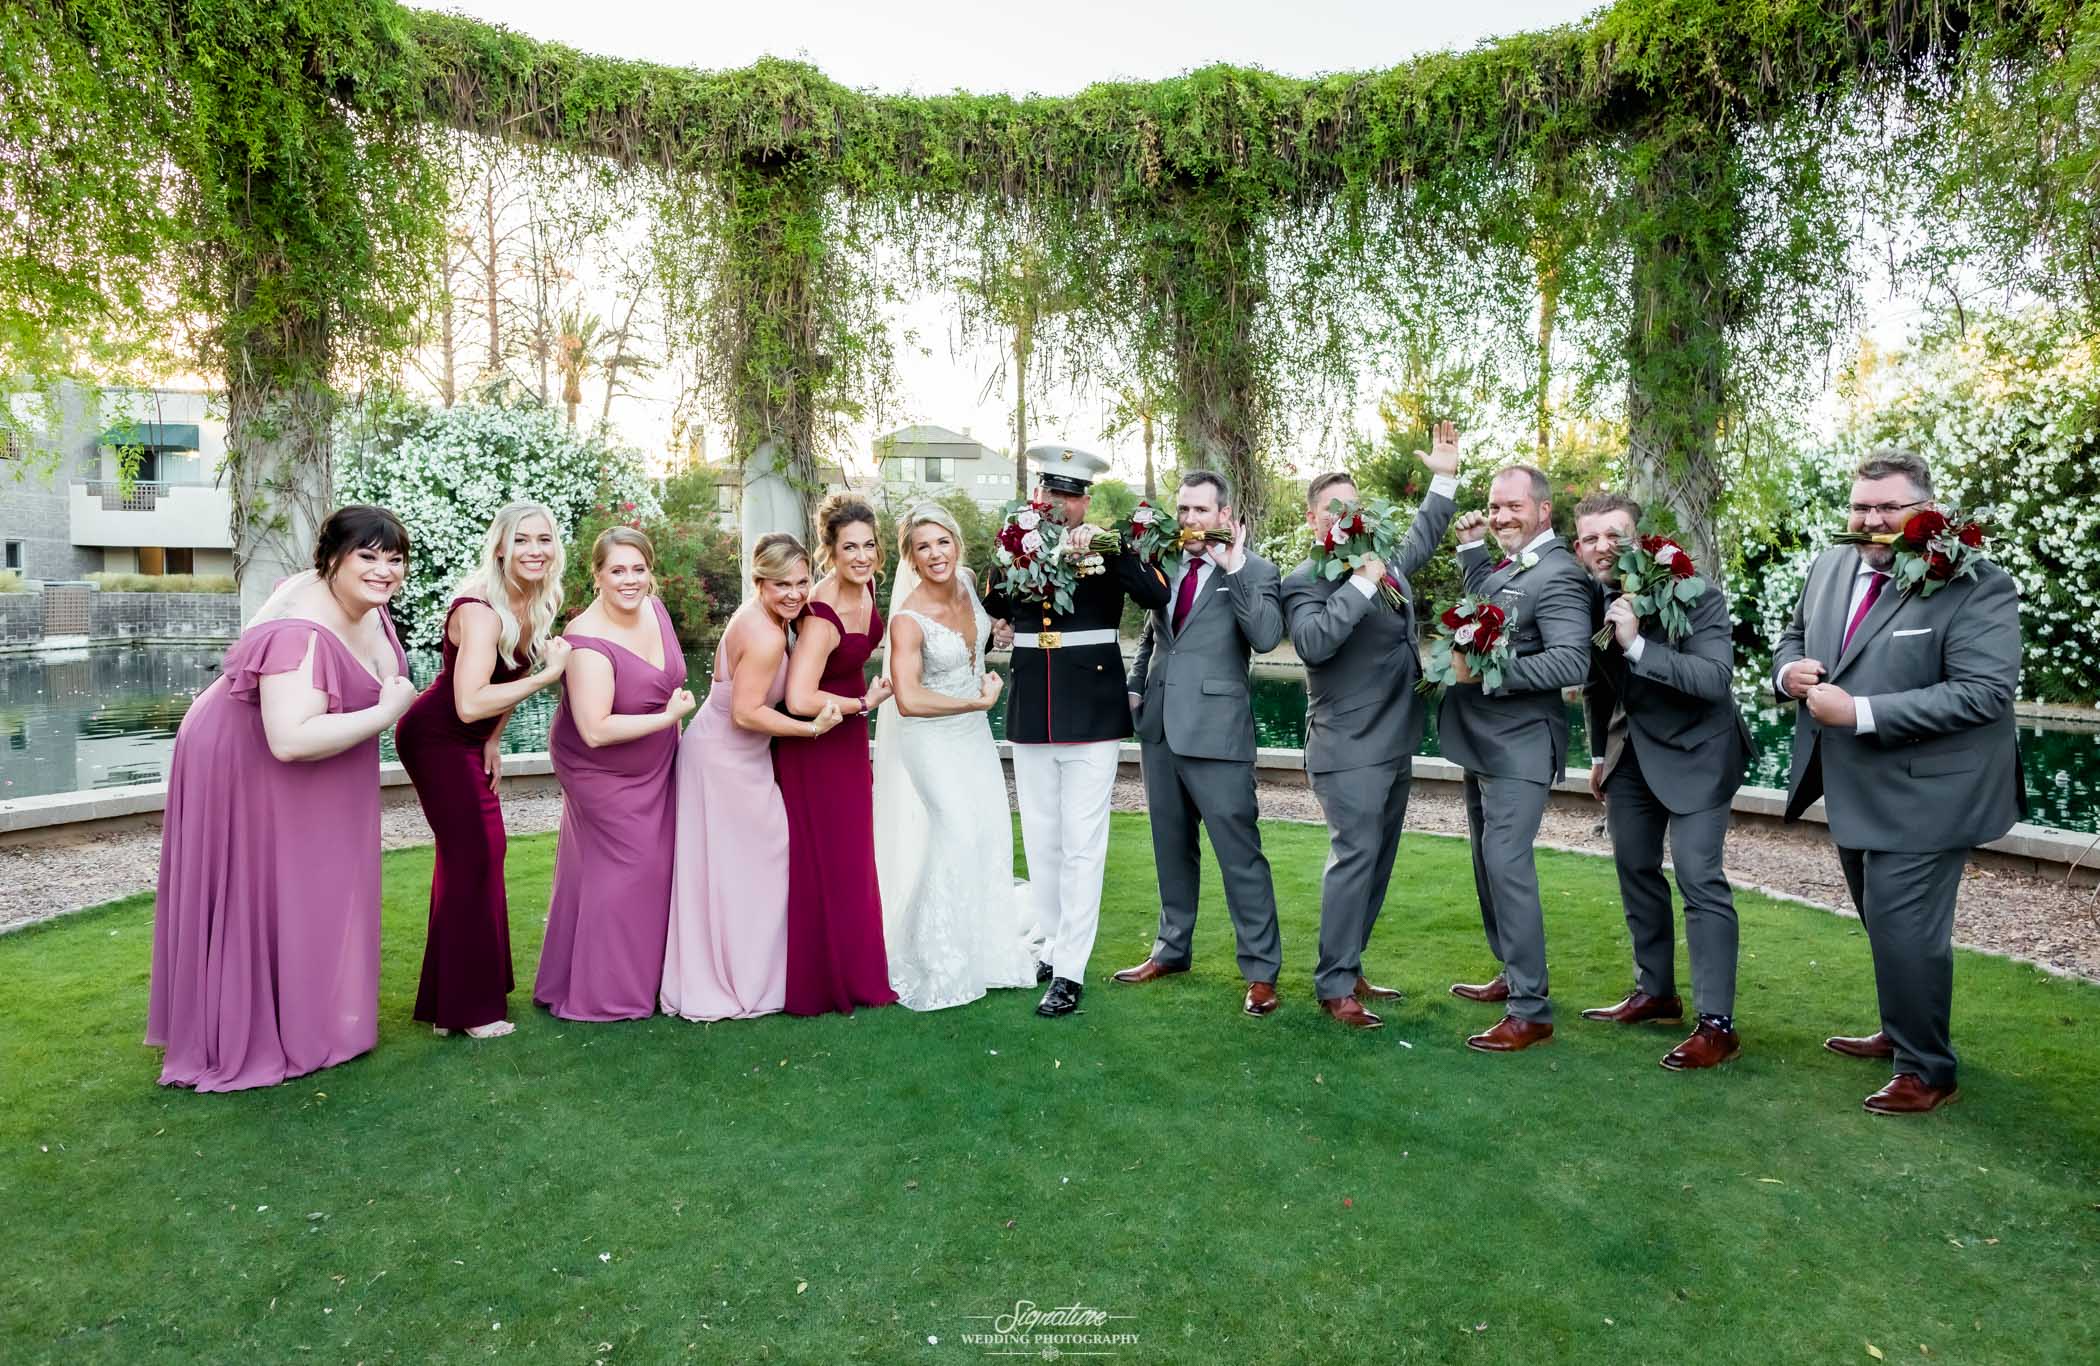 Wedding party funny pose outside under vines